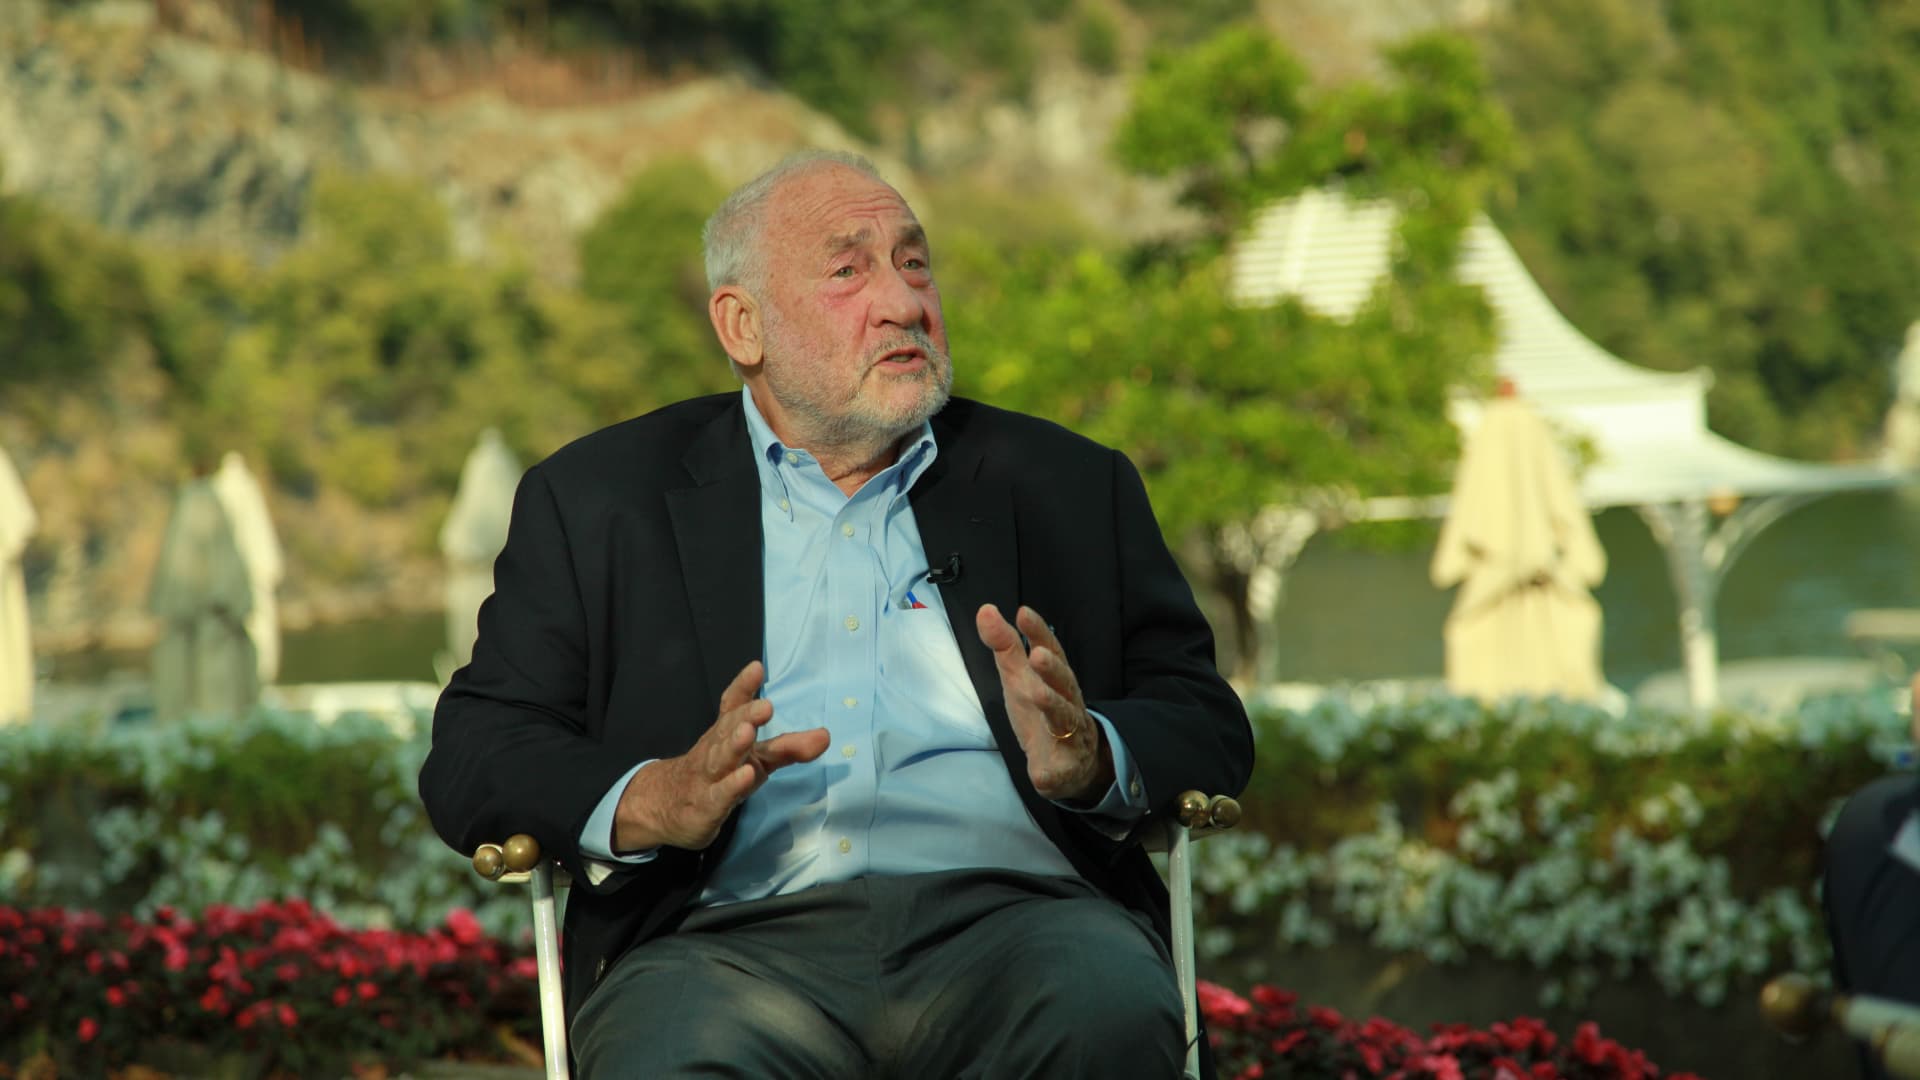 Economist Joseph Stiglitz says there are 3 reasons why further Fed rate hikes might make inflation worse